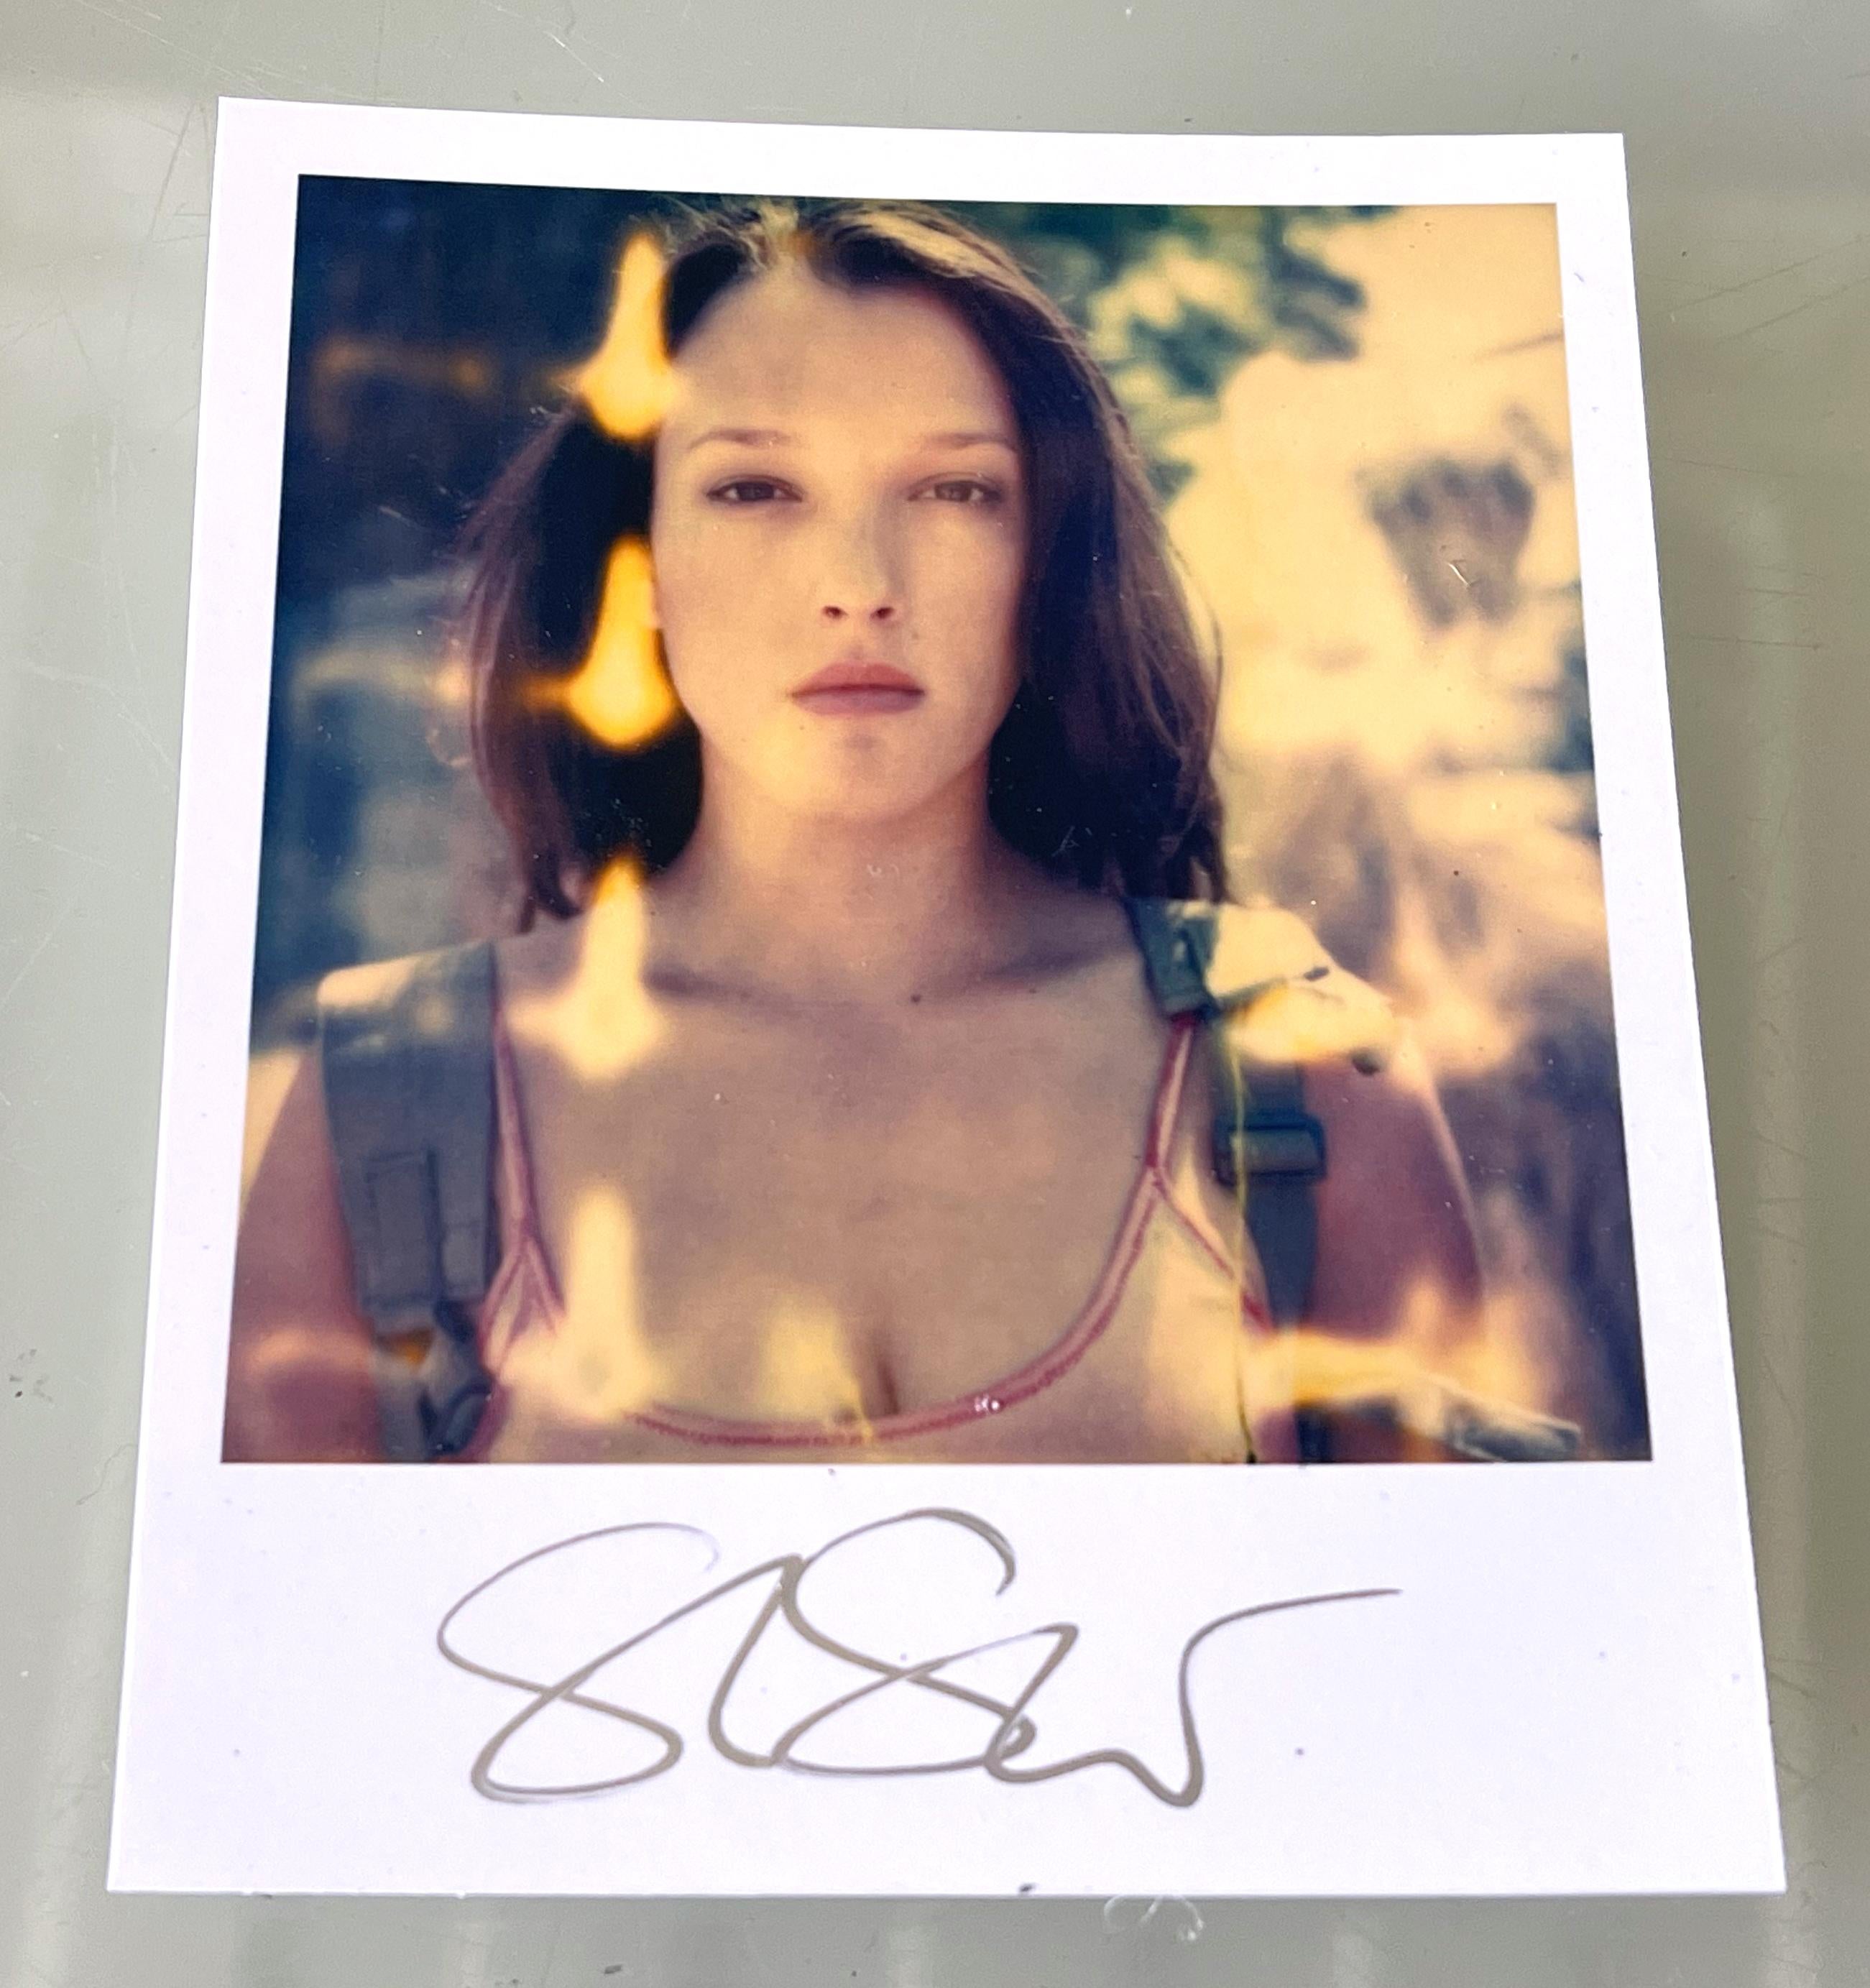 Stefanie Schneider's Mini
Margarita (Till Death Do Us Part) - 2005
featuring Austin Tate

signed in front, not mounted. 
Digital Color Photographs based on a Polaroid. 

Polaroid sized open Editions 1999-2023
10.7 x 8.8cm (Image 7.9x7.7cm)

Included